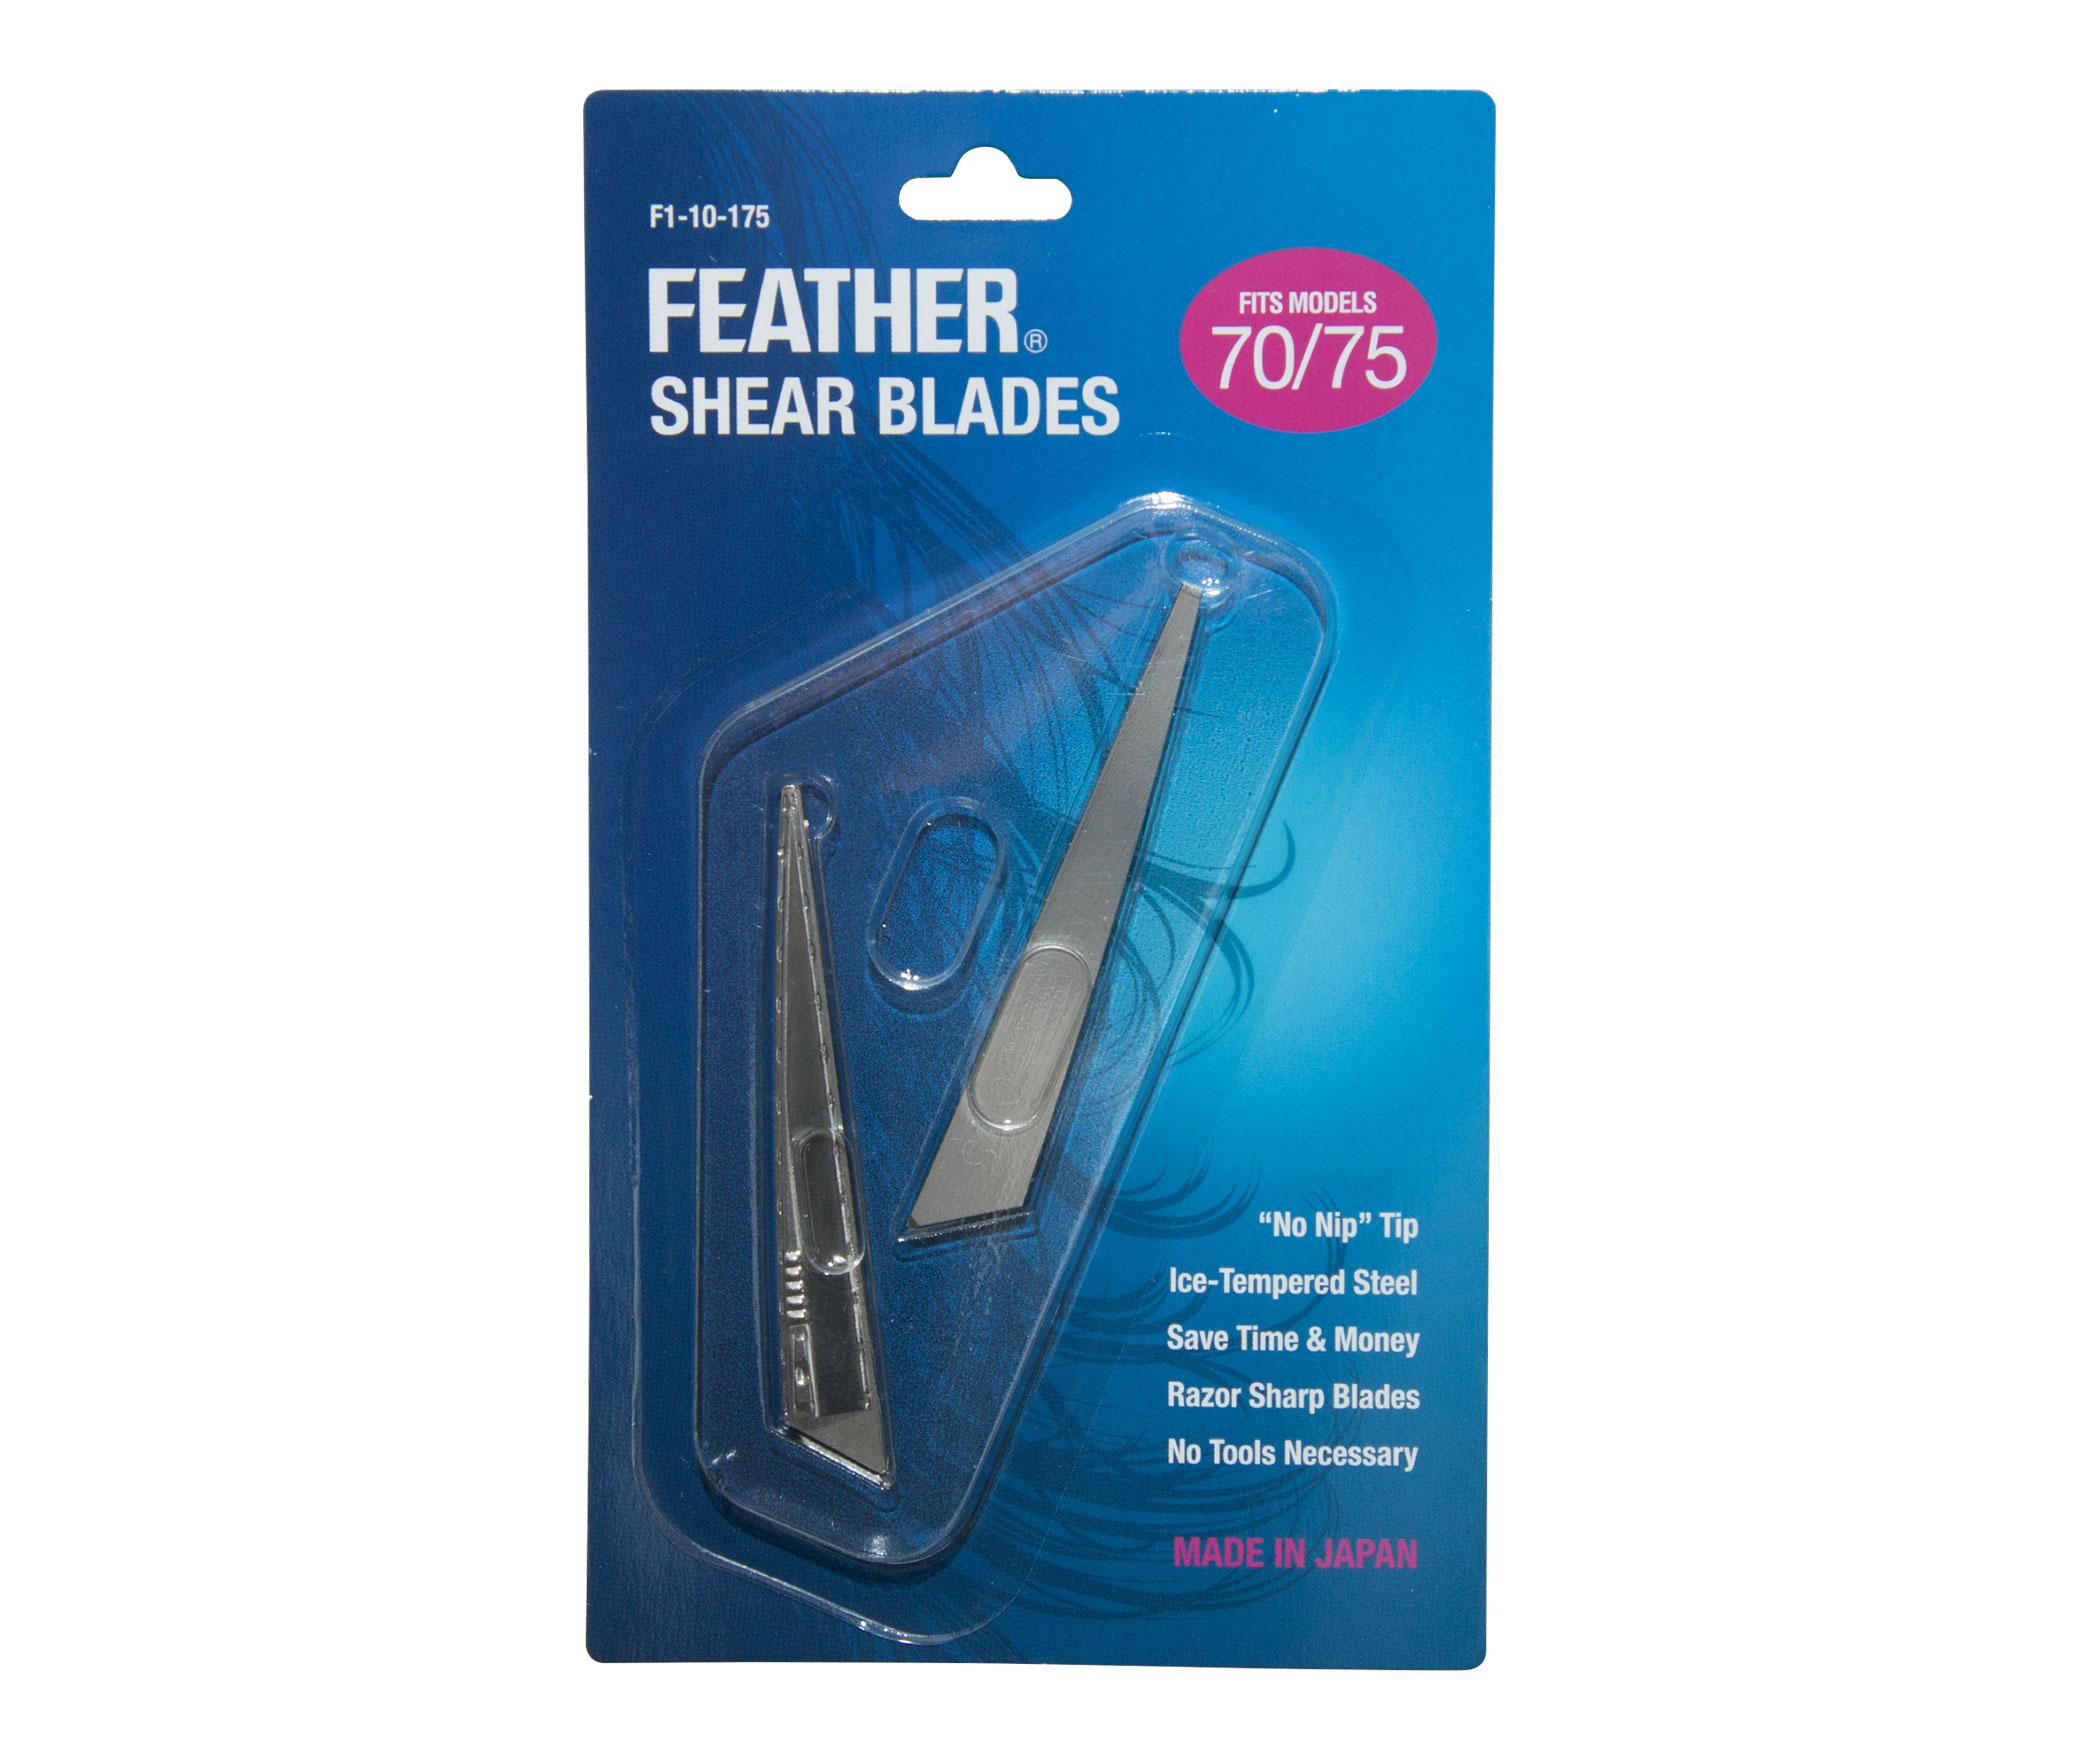 Feather Switch Blade Shear Replacement Blades 7.0 and 7.5